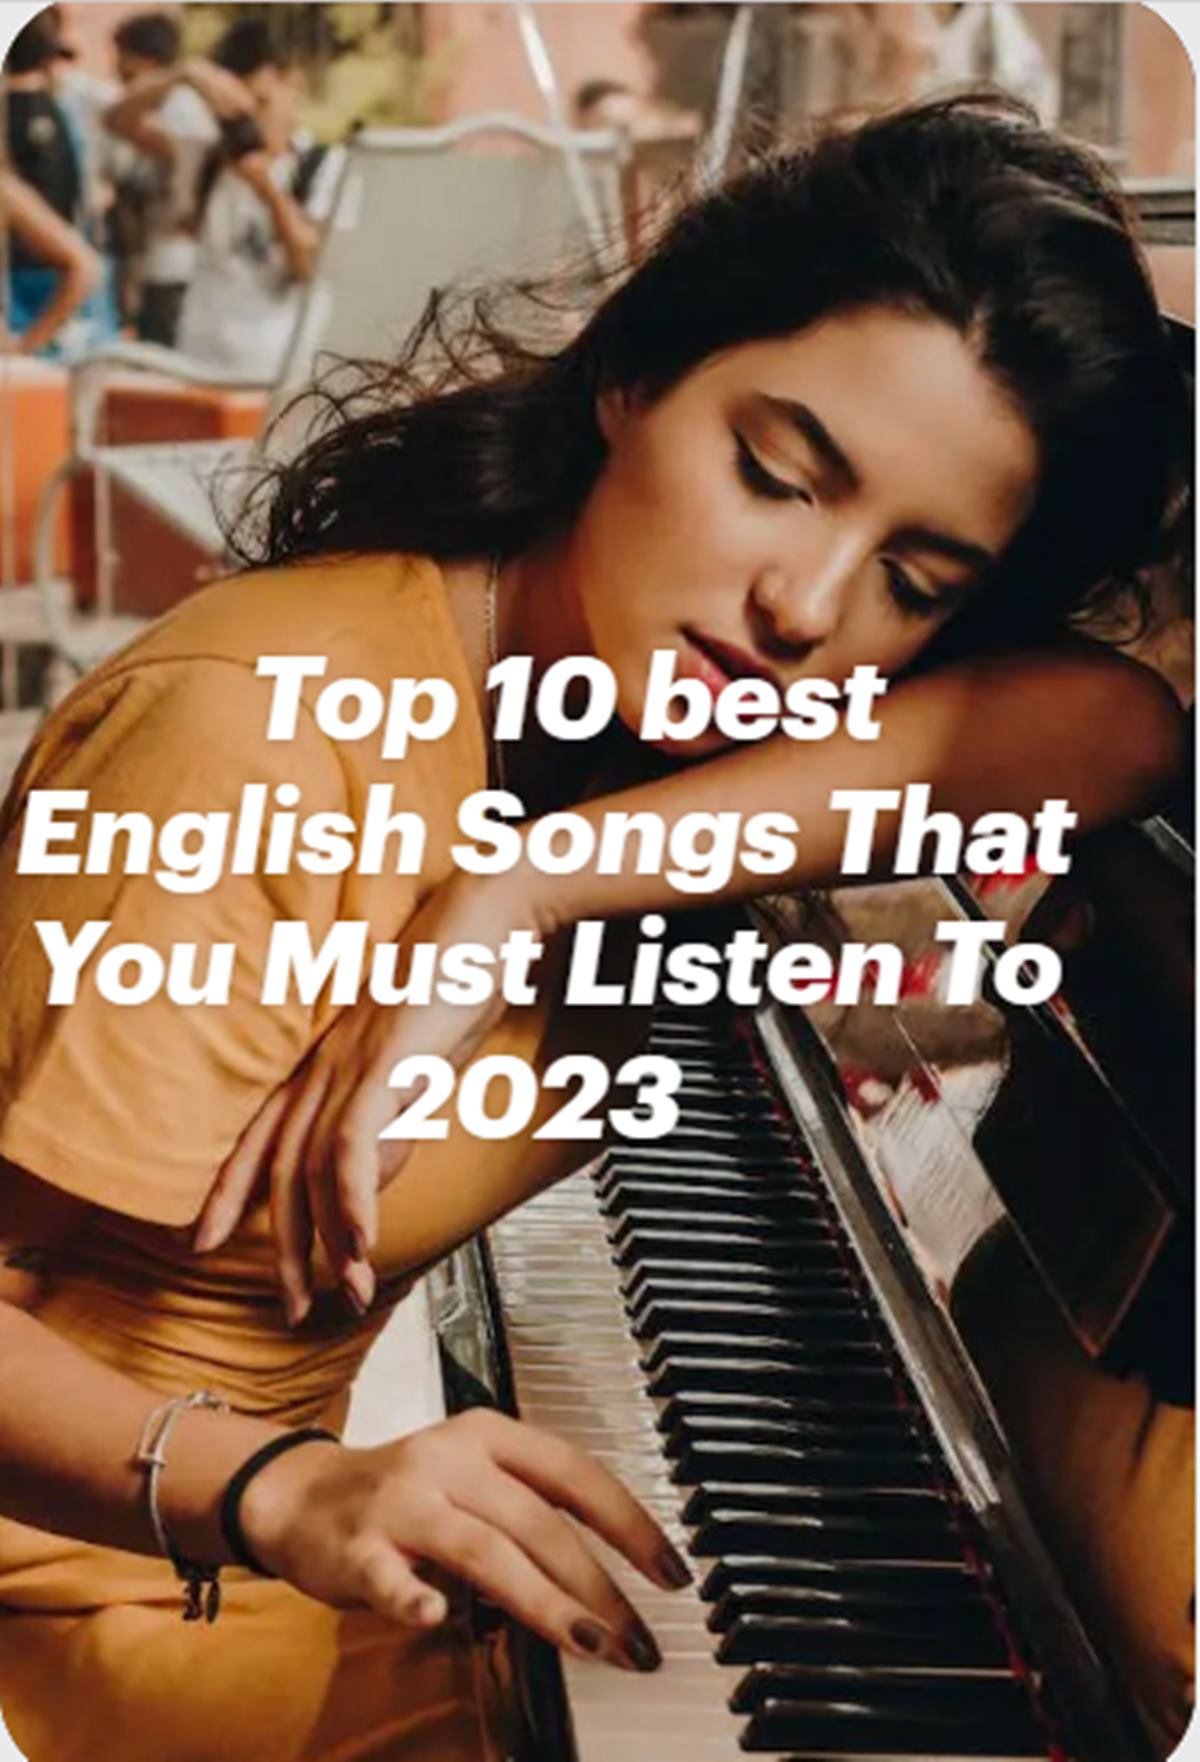 Top 10 best English Songs That You Must Listen To 2023